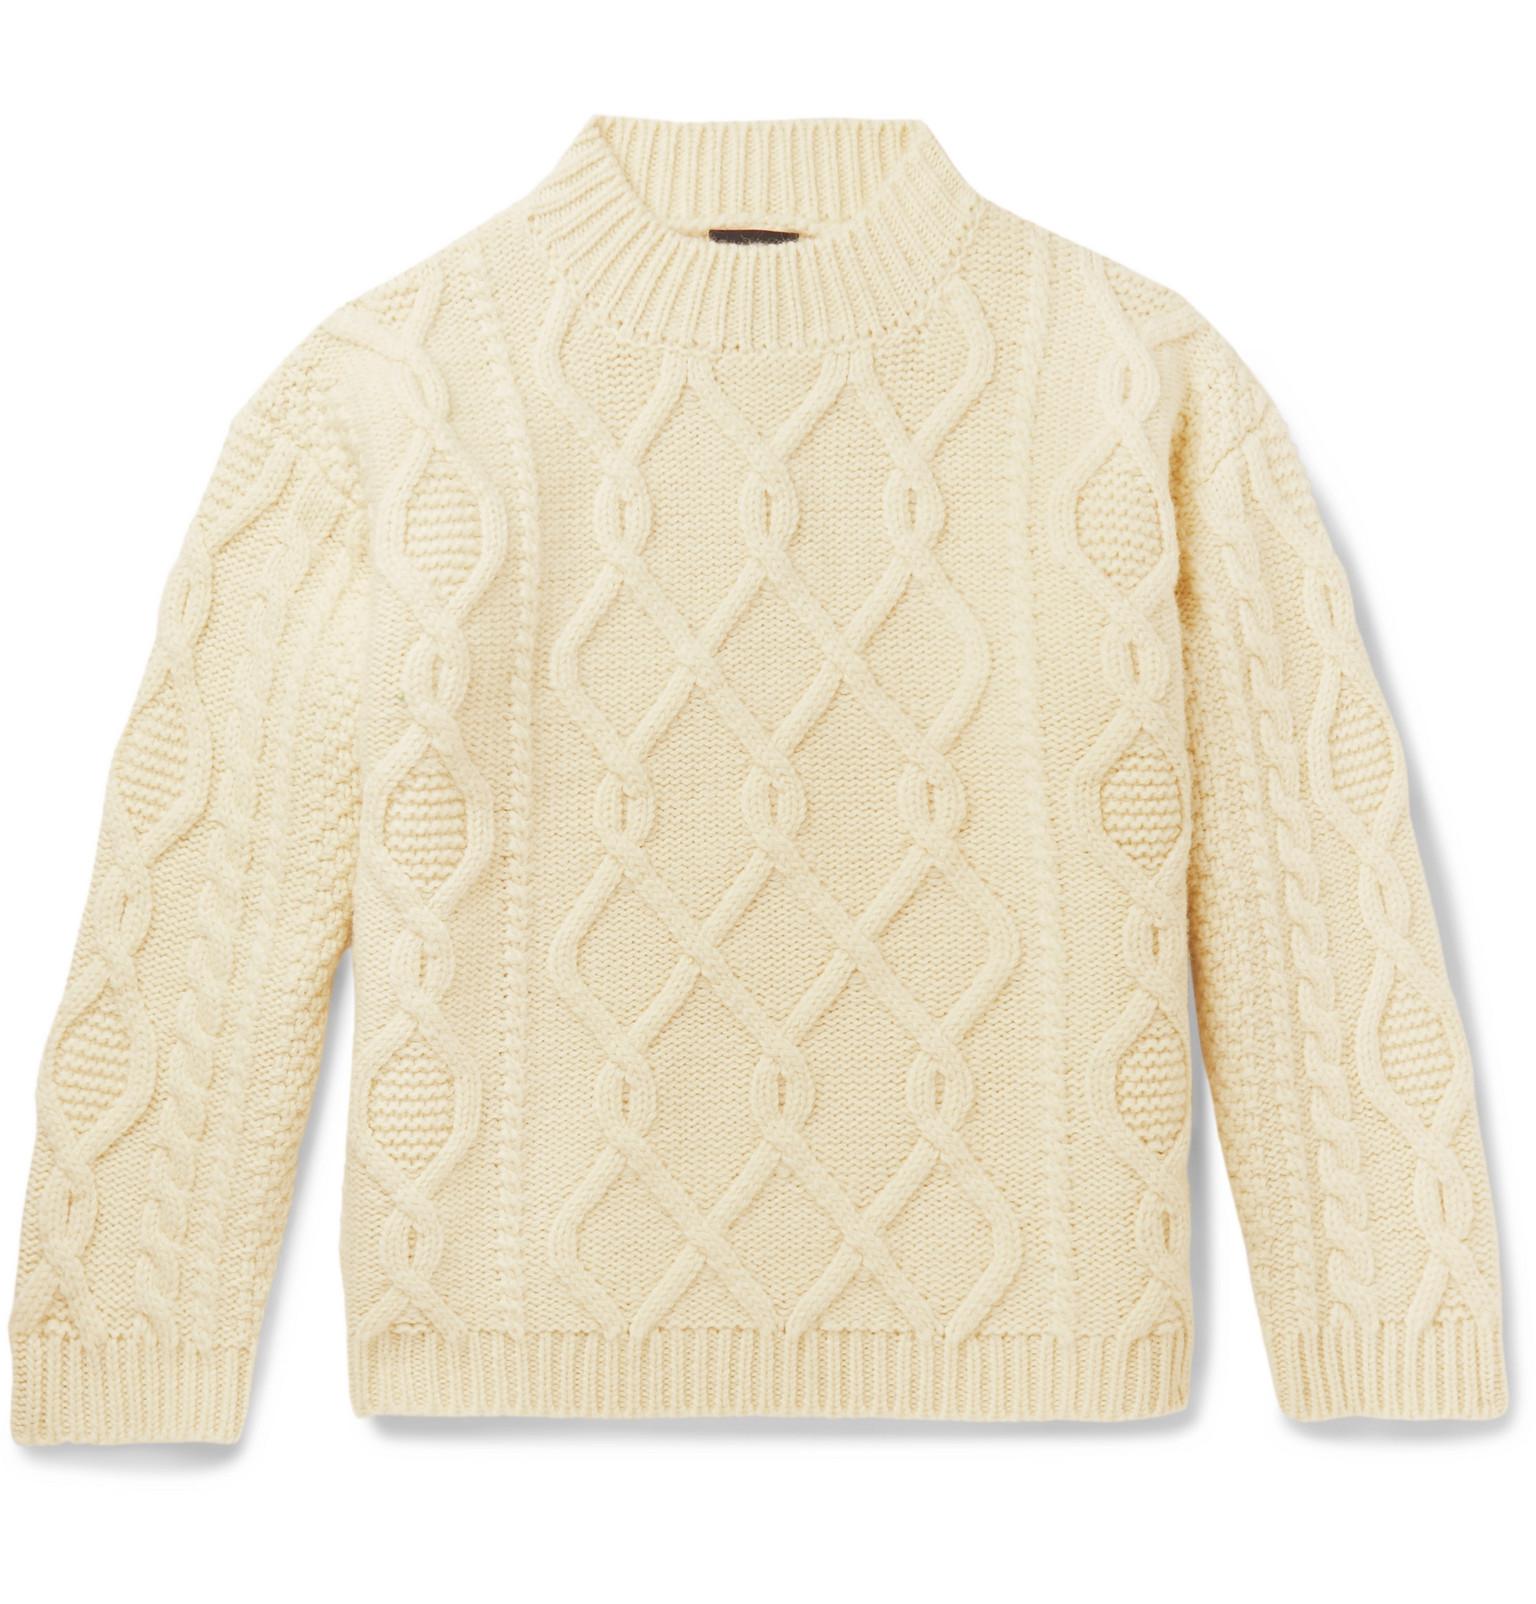 Drake's Cable-knit Wool Sweater in Natural for Men - Lyst